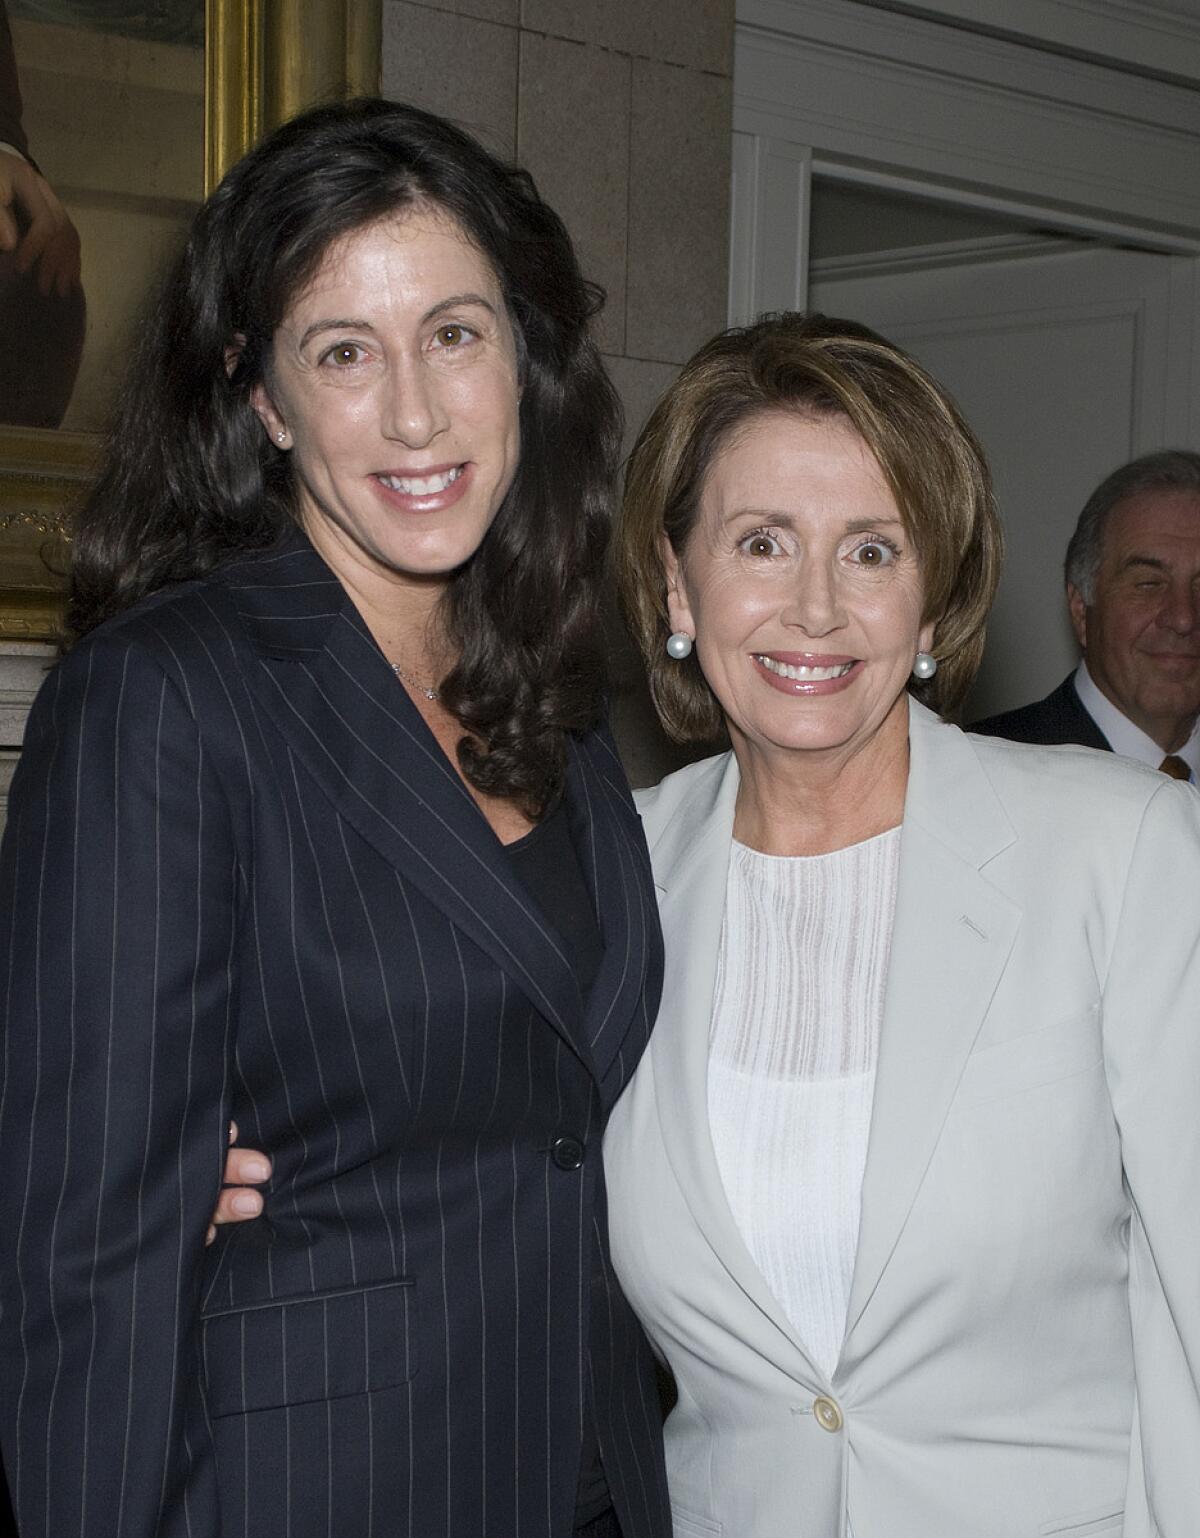 Christine Pelosi and her mother, Nancy Pelosi. (Gilbert Carrasquillo / Getty Images)